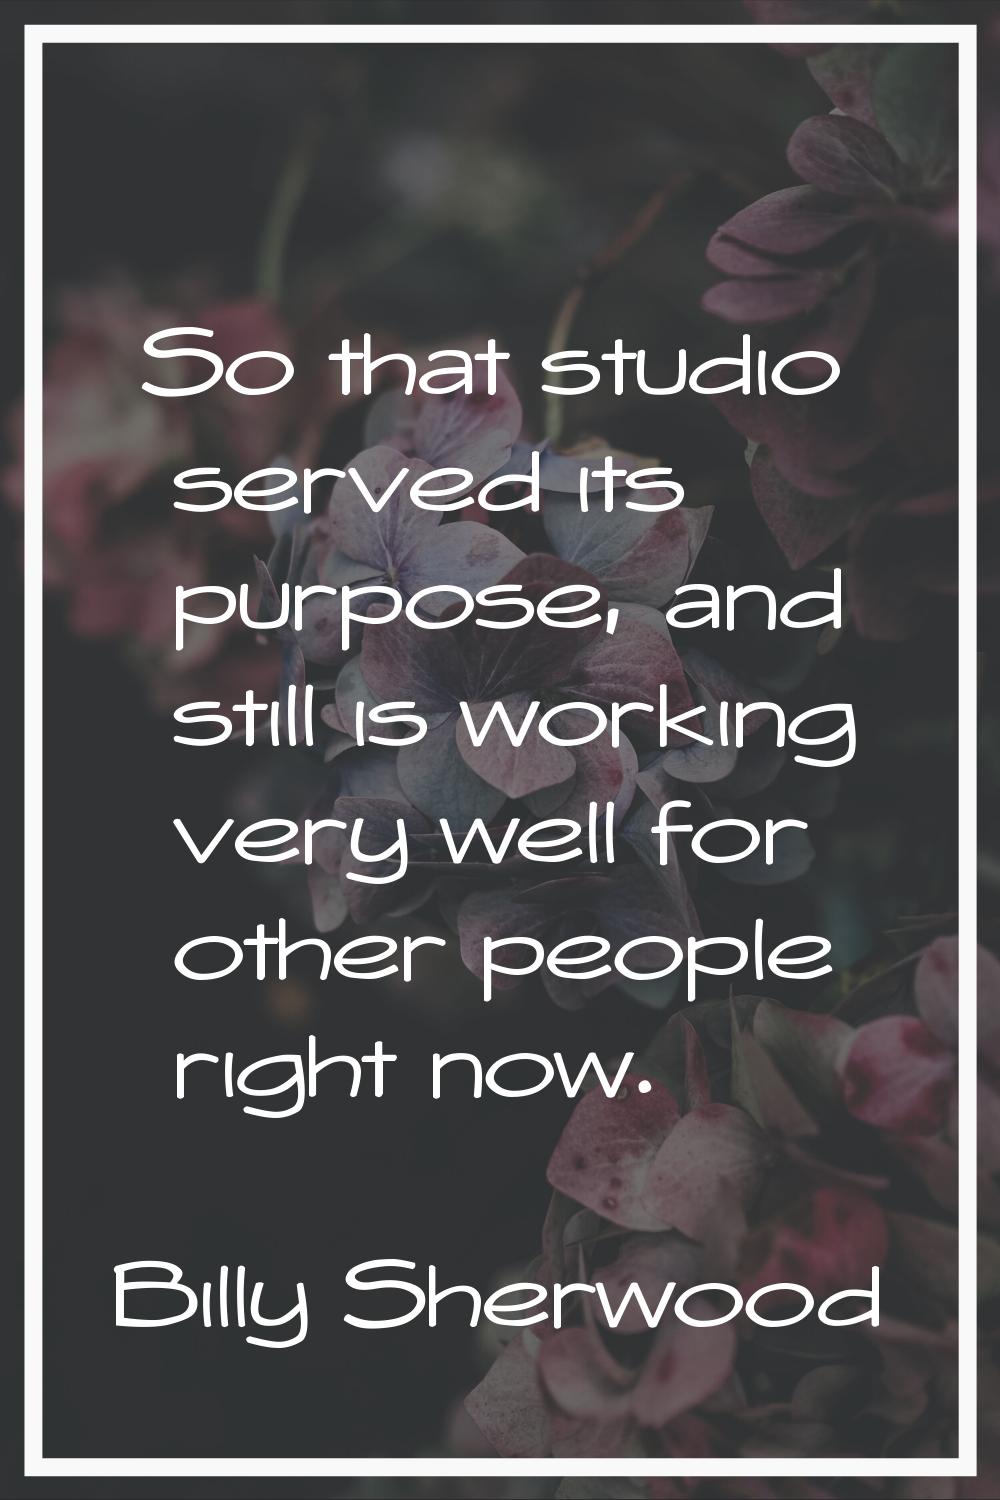 So that studio served its purpose, and still is working very well for other people right now.